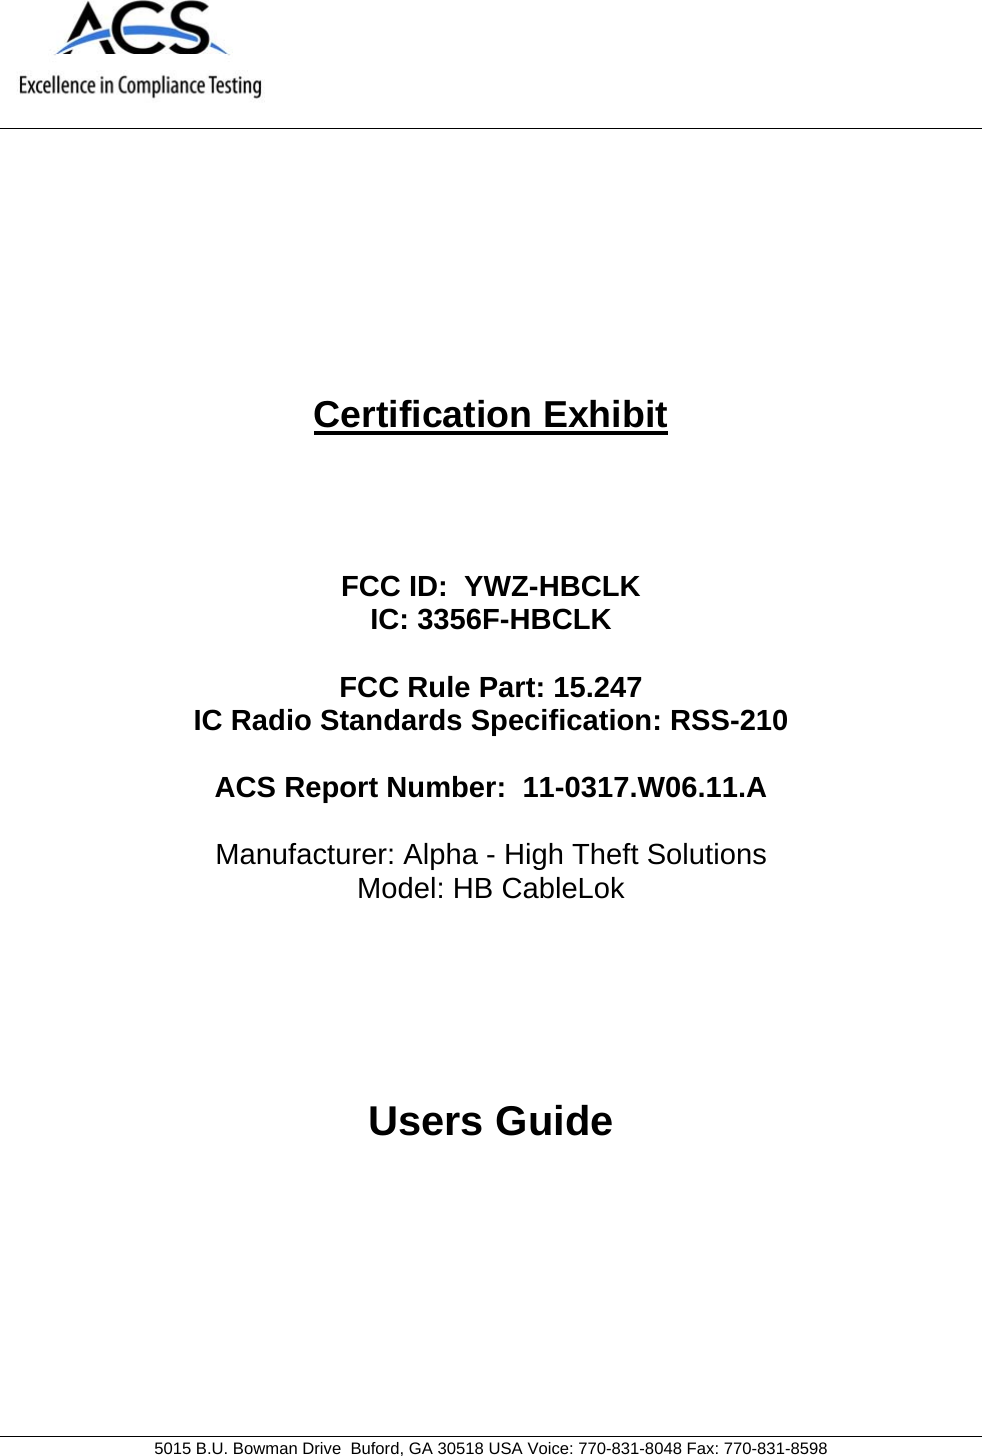     5015 B.U. Bowman Drive  Buford, GA 30518 USA Voice: 770-831-8048 Fax: 770-831-8598   Certification Exhibit     FCC ID:  YWZ-HBCLK IC: 3356F-HBCLK  FCC Rule Part: 15.247 IC Radio Standards Specification: RSS-210  ACS Report Number:  11-0317.W06.11.A   Manufacturer: Alpha - High Theft Solutions Model: HB CableLok     Users Guide  